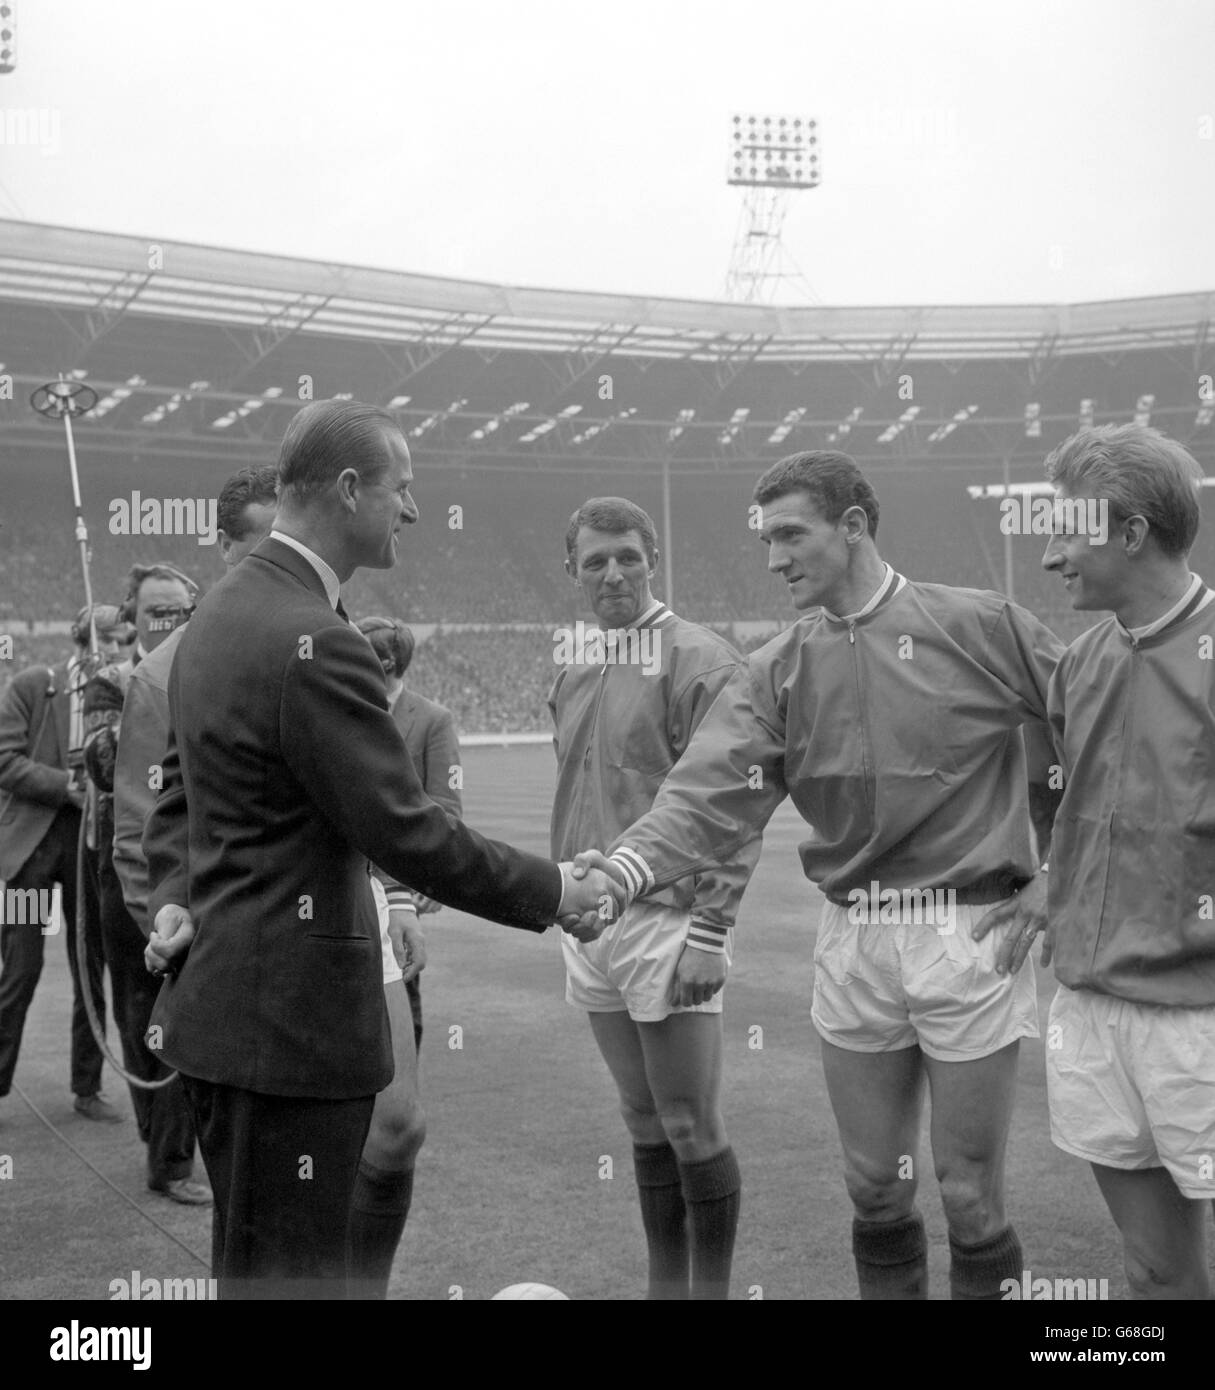 Prince Philip, The Duke of Edinburgh, shakes hands with centre-half Bill Foulkes as the Manchester United players were presented to him on the field at Wembley Stadium, London, before the kick-off in the FA Cup. On left is centre-forward David Herd, who was to score two goals, and on right is inside-left Denis Law, who was to score one goal in United's 3-1 victory over Leicester City. Stock Photo